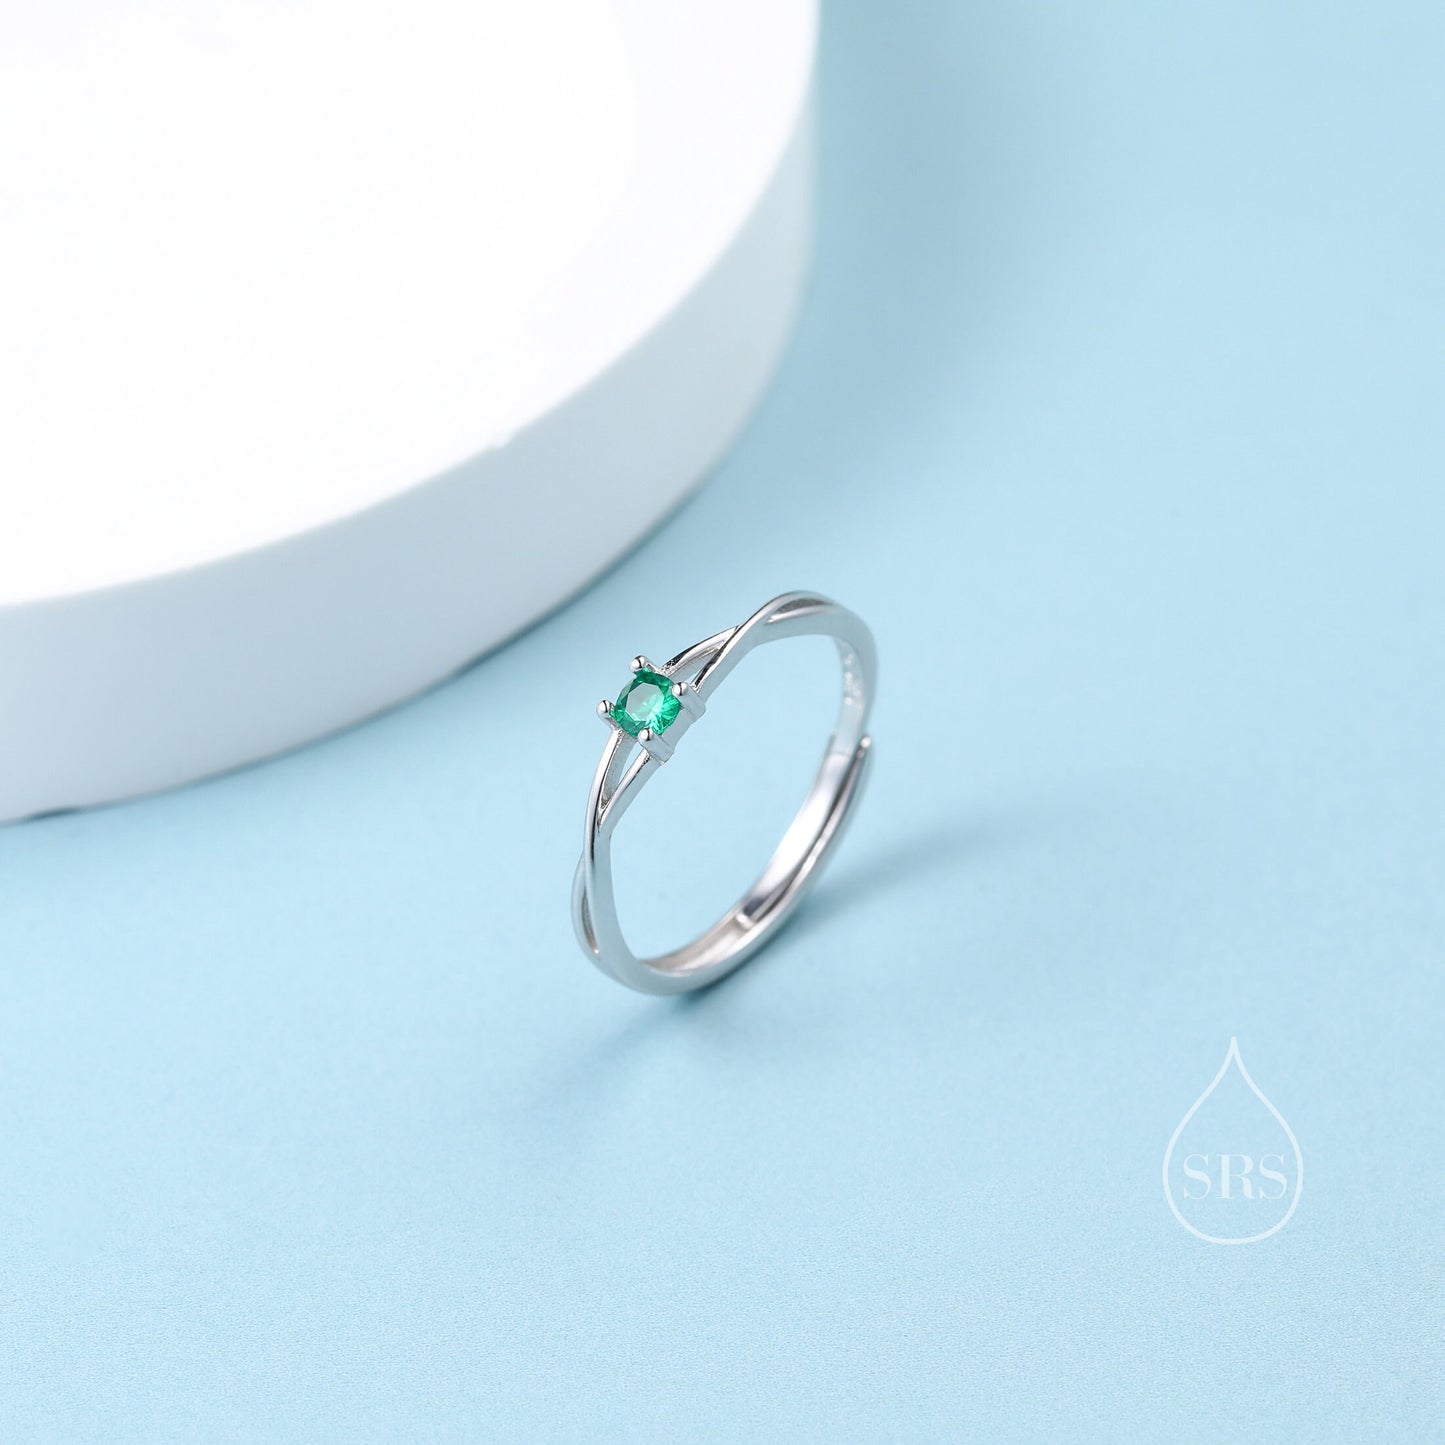 CZ Twist Ring in Sterling Silver, Adjustable Size, Silver or Gold, Emerald Green Ring, Minimalist Ring, Geometric Ring, Solid Silver Ring